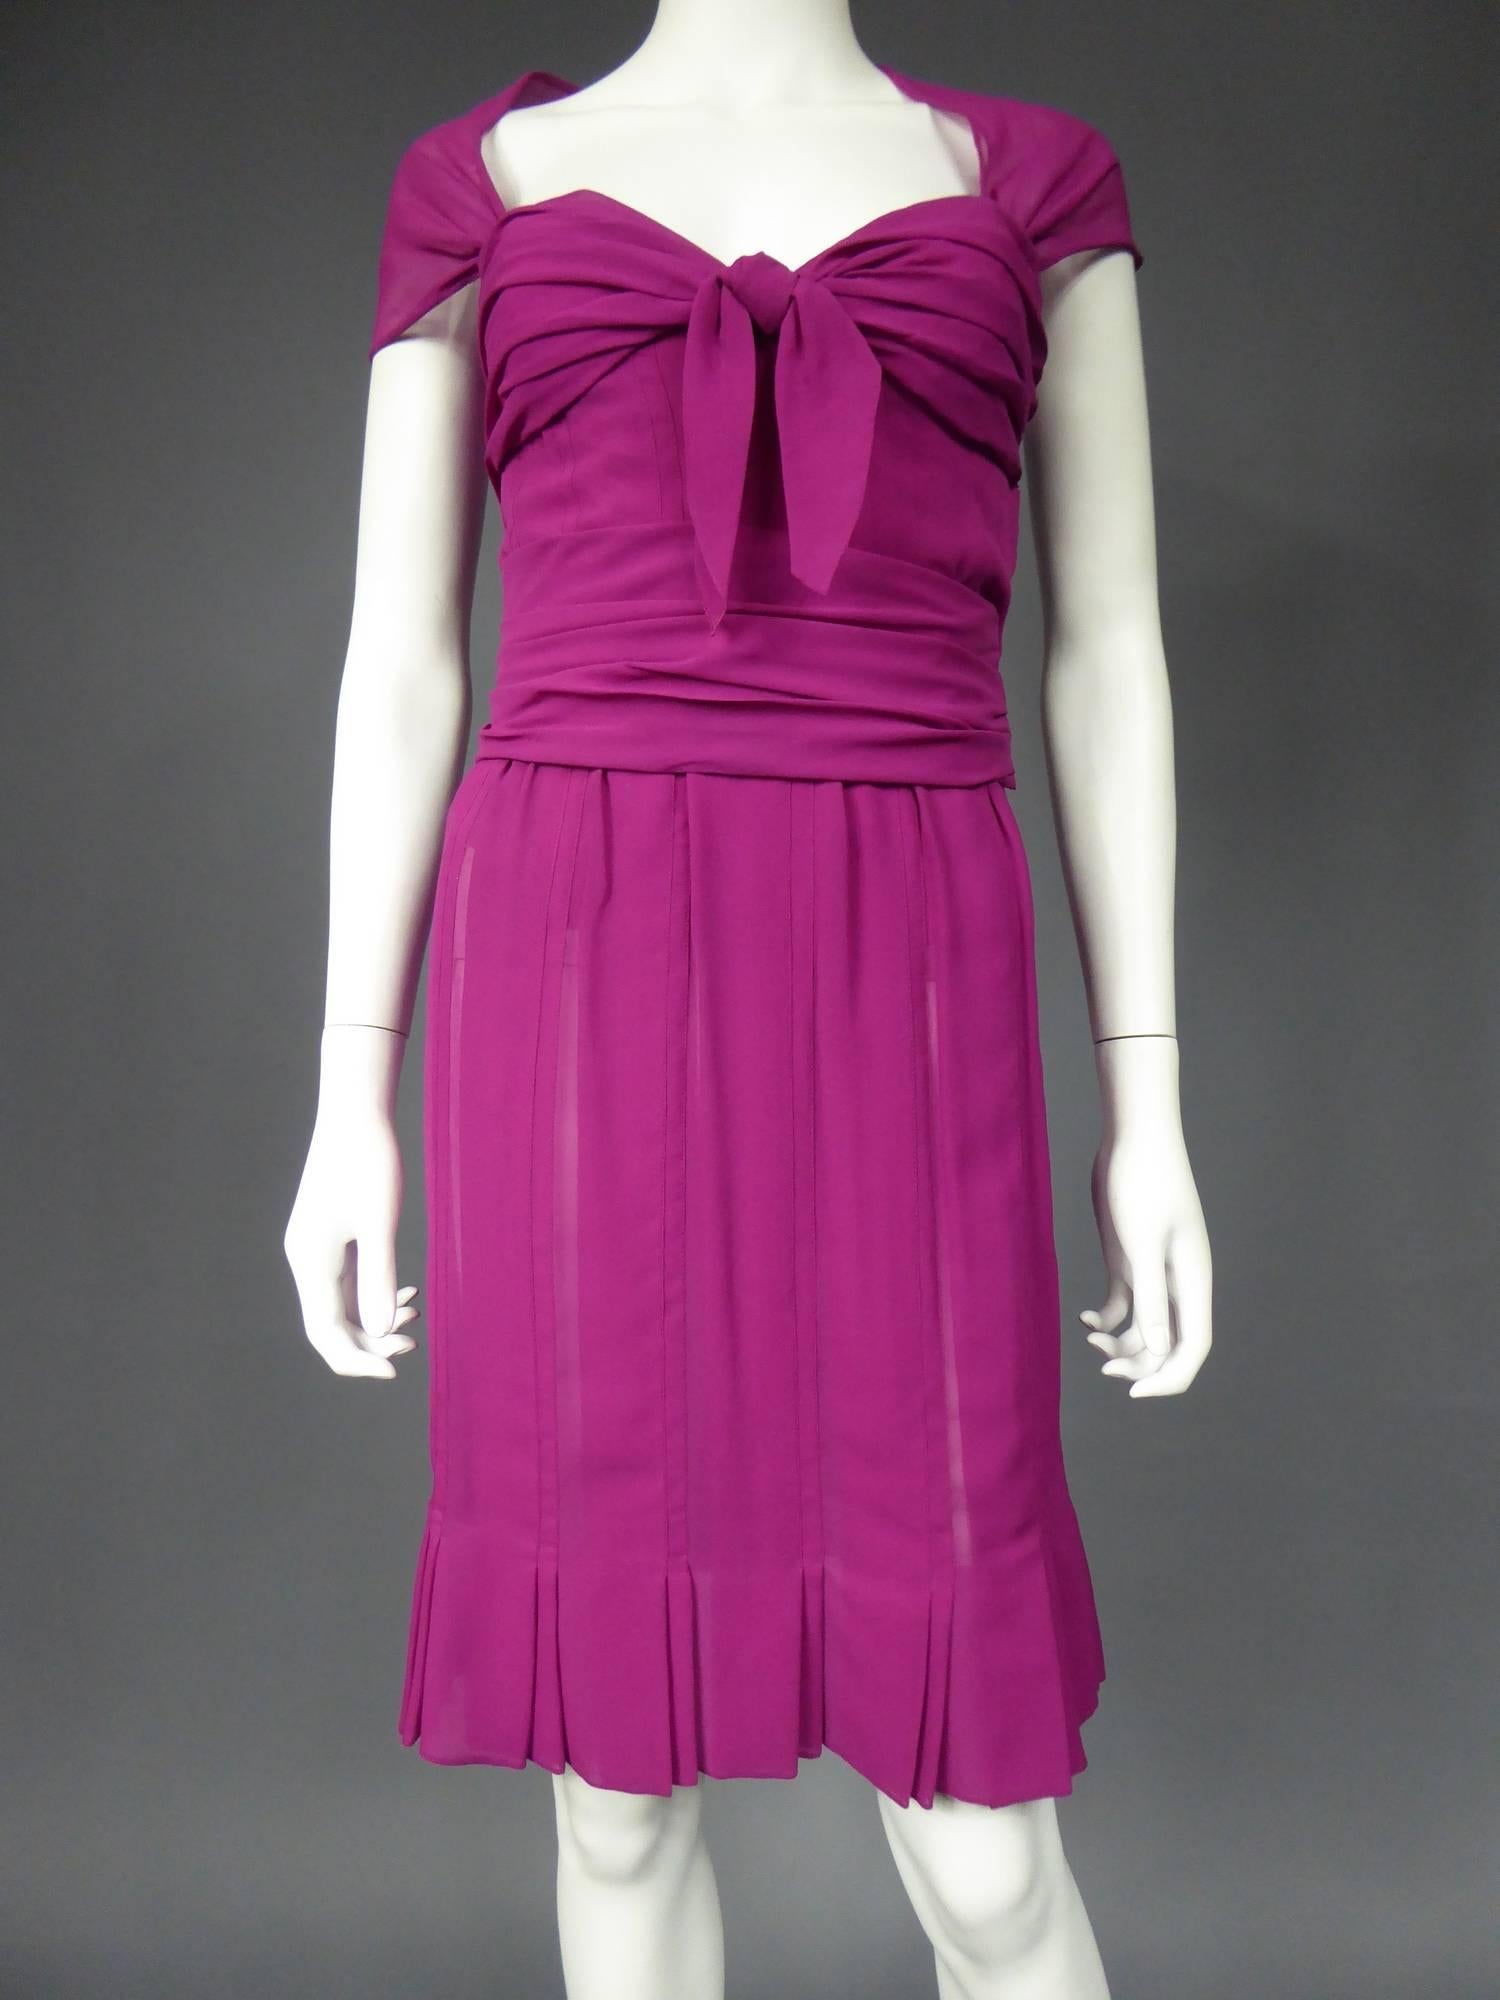 Circa 1989 - 1990

France

Cocktail dress in raspberry pink silk muslin from Dior-Gianfranco Ferré. Bodice inspired by 1940's Fashion, fully corseted and lined with matching chiffon silk. Bodice sheathed to the hips, boned and reinforced on the